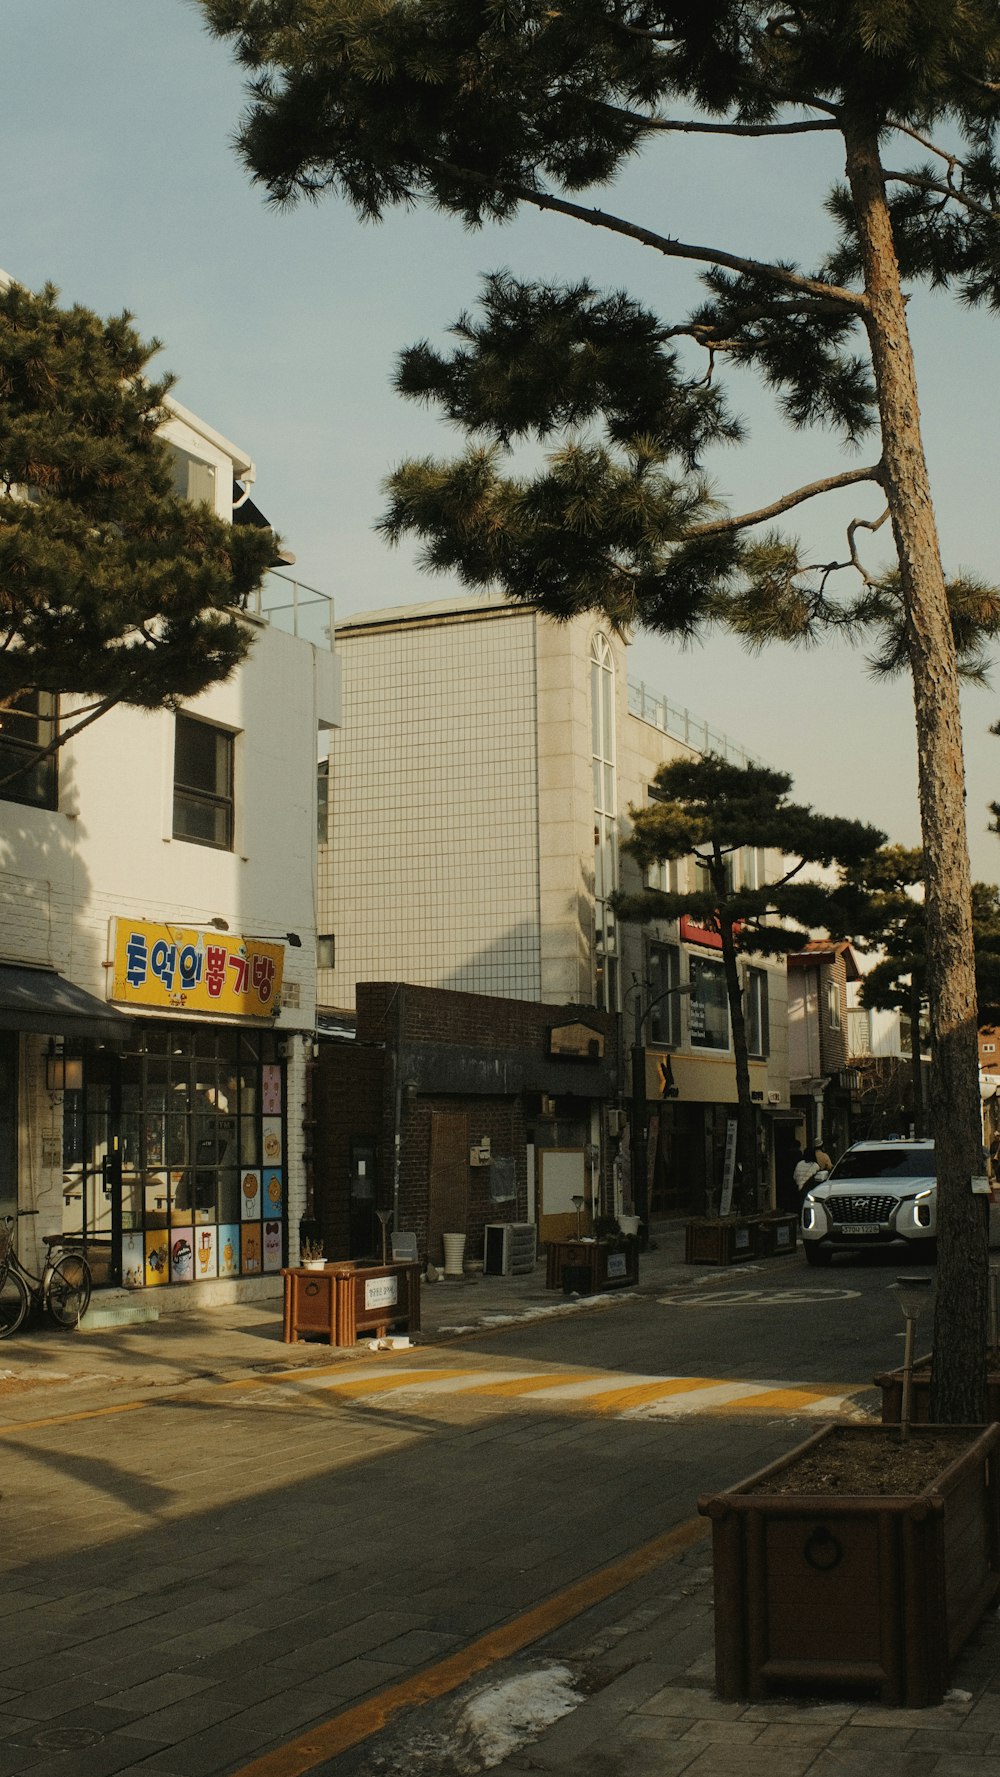 a street corner with a tall tree in the foreground